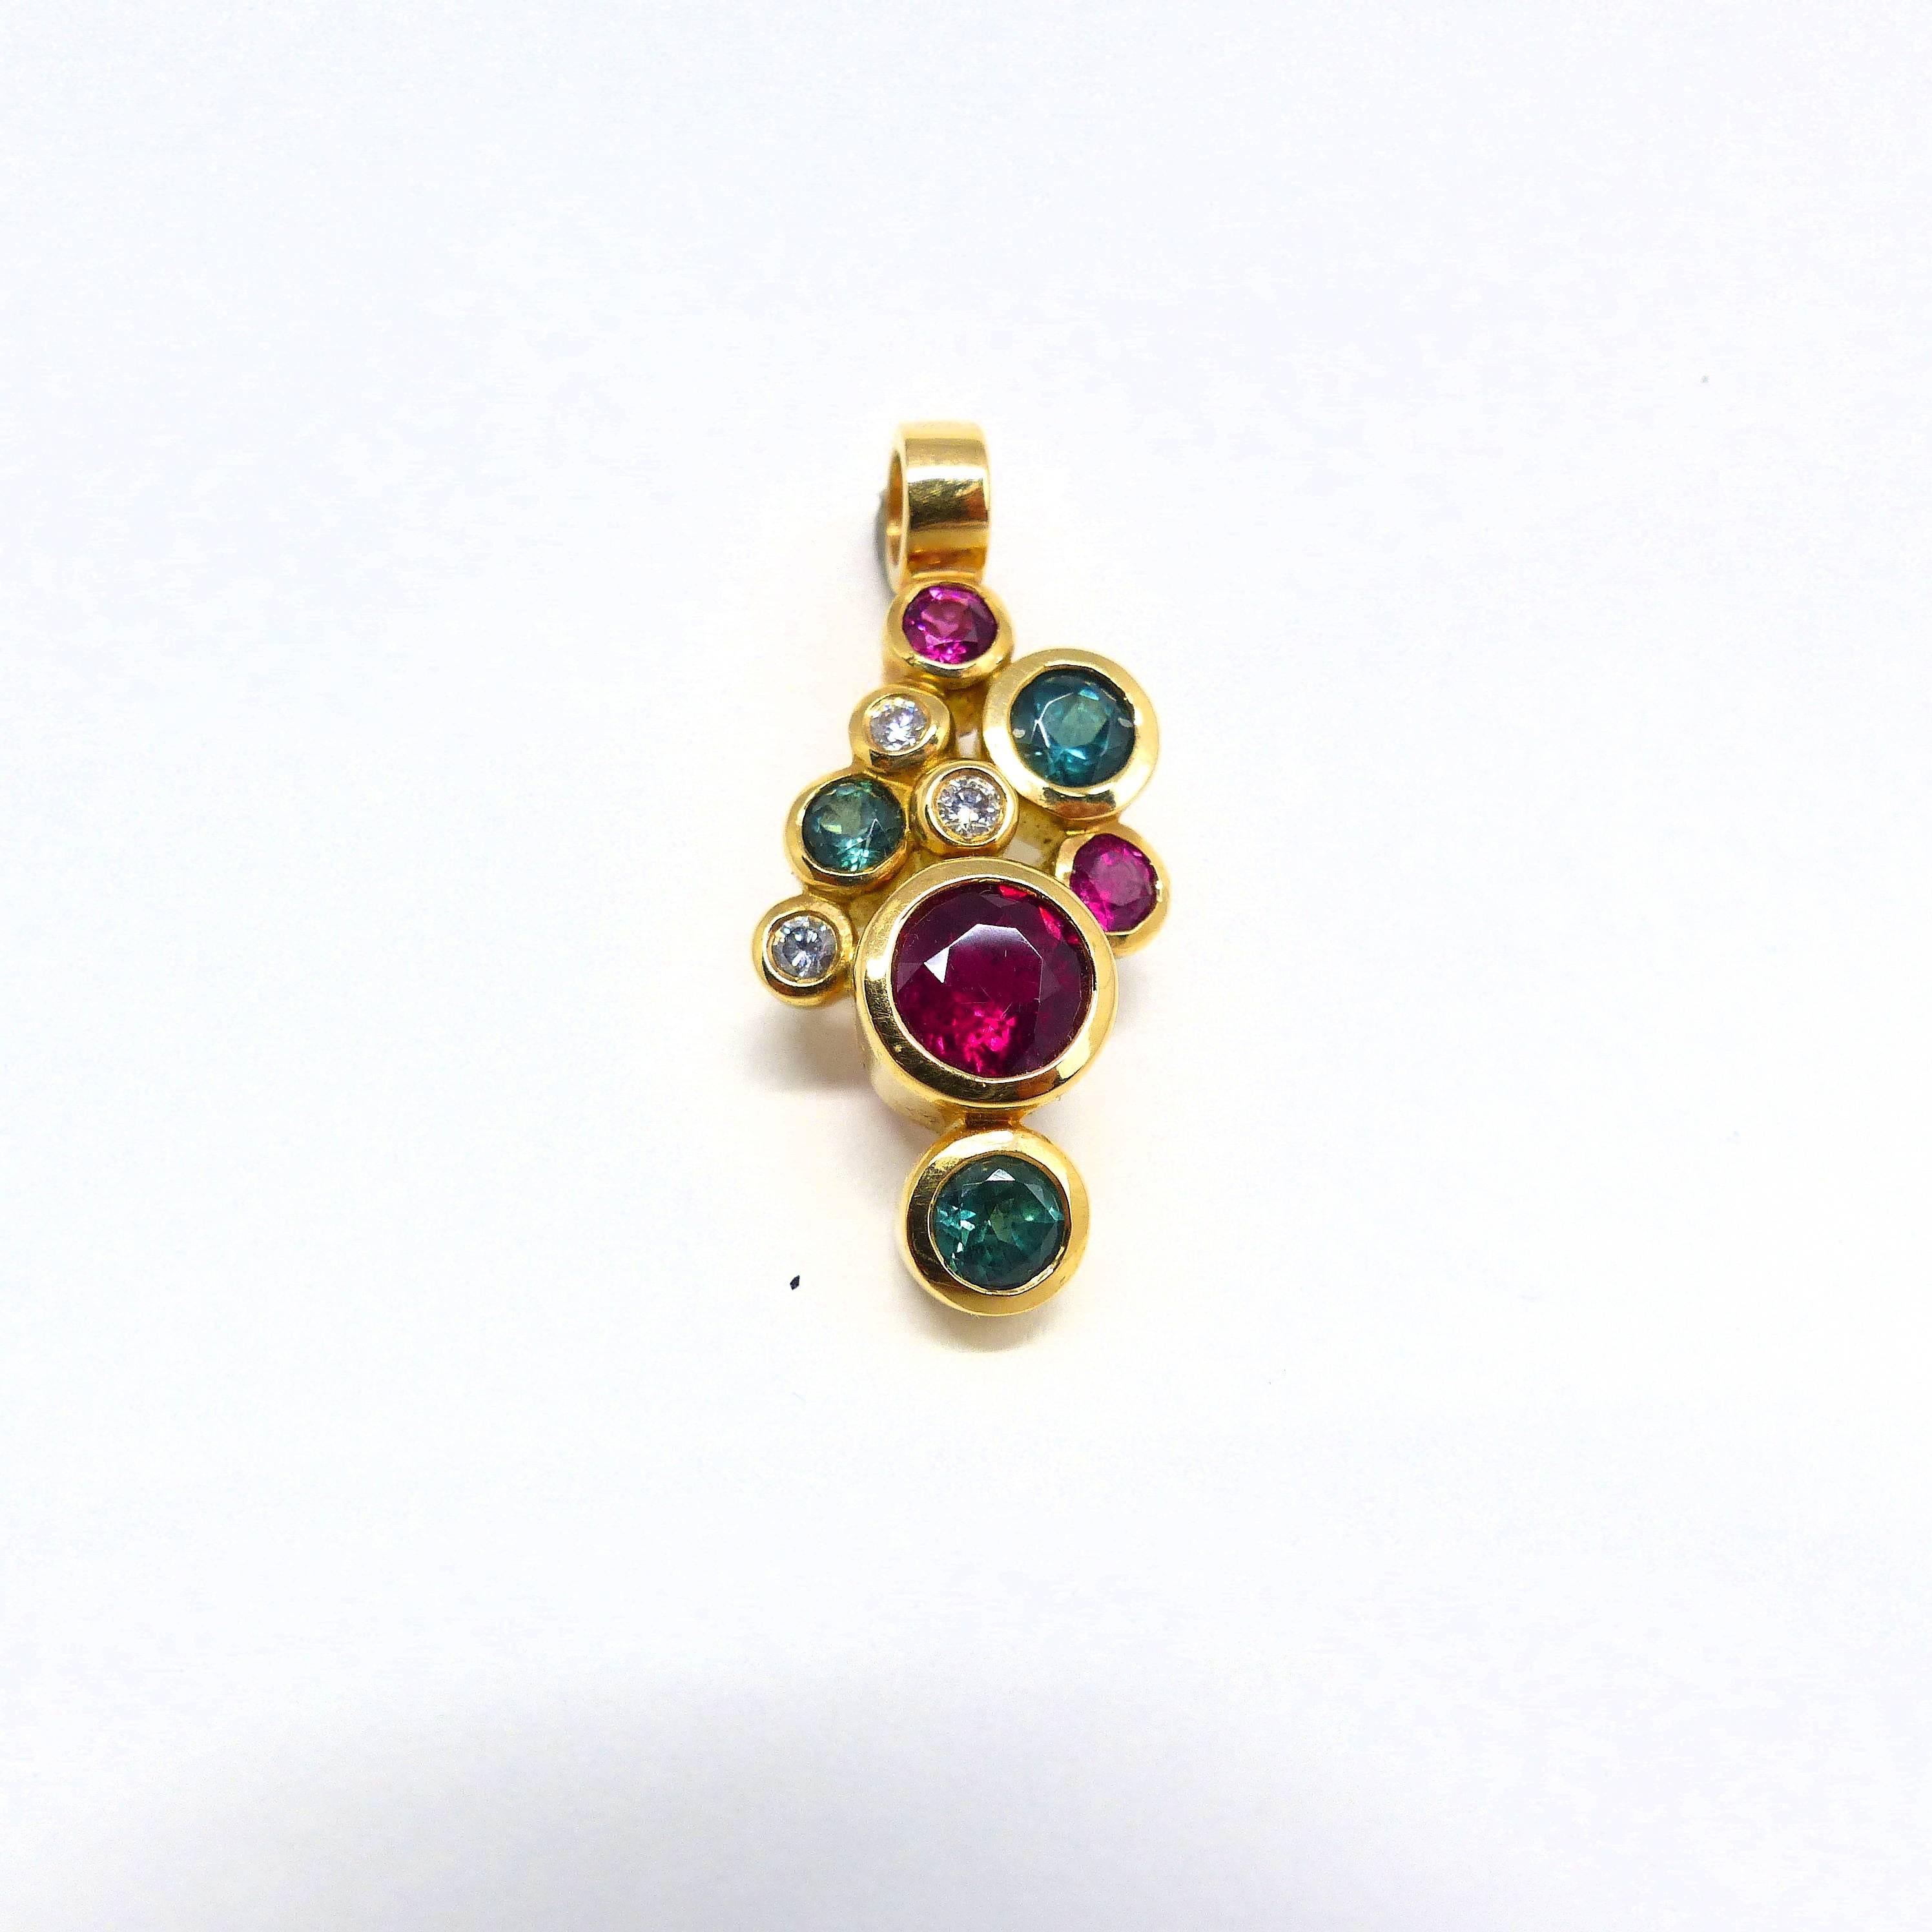 Thomas Leyser is renowned for his contemporary jewellery designs utilizing fine coloured gemstones and diamonds. 

This pendant in 18k rose gold is set with 6x fine Tourmalines & Rubelites (facetted, round, 3-6mm, 1.74ct). and 3x Diamonds